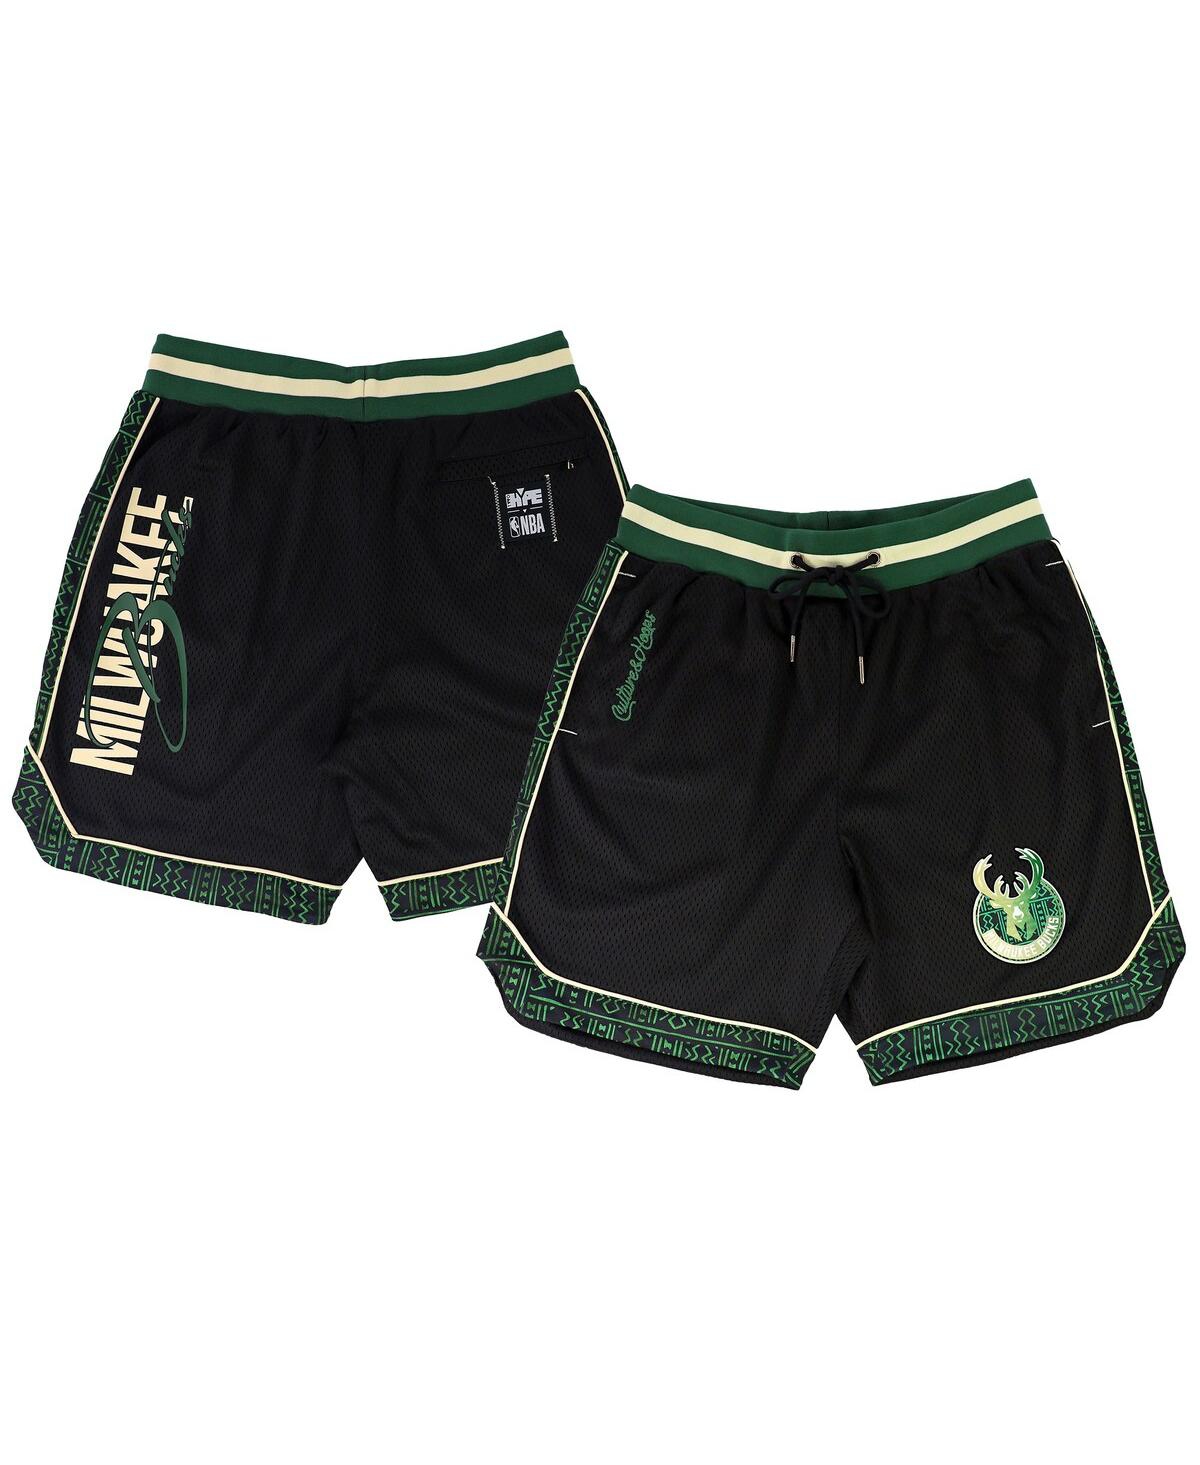 Men's and Women's Nba x Two Hype Black Milwaukee Bucks Culture and Hoops Double Mesh Shorts - Black